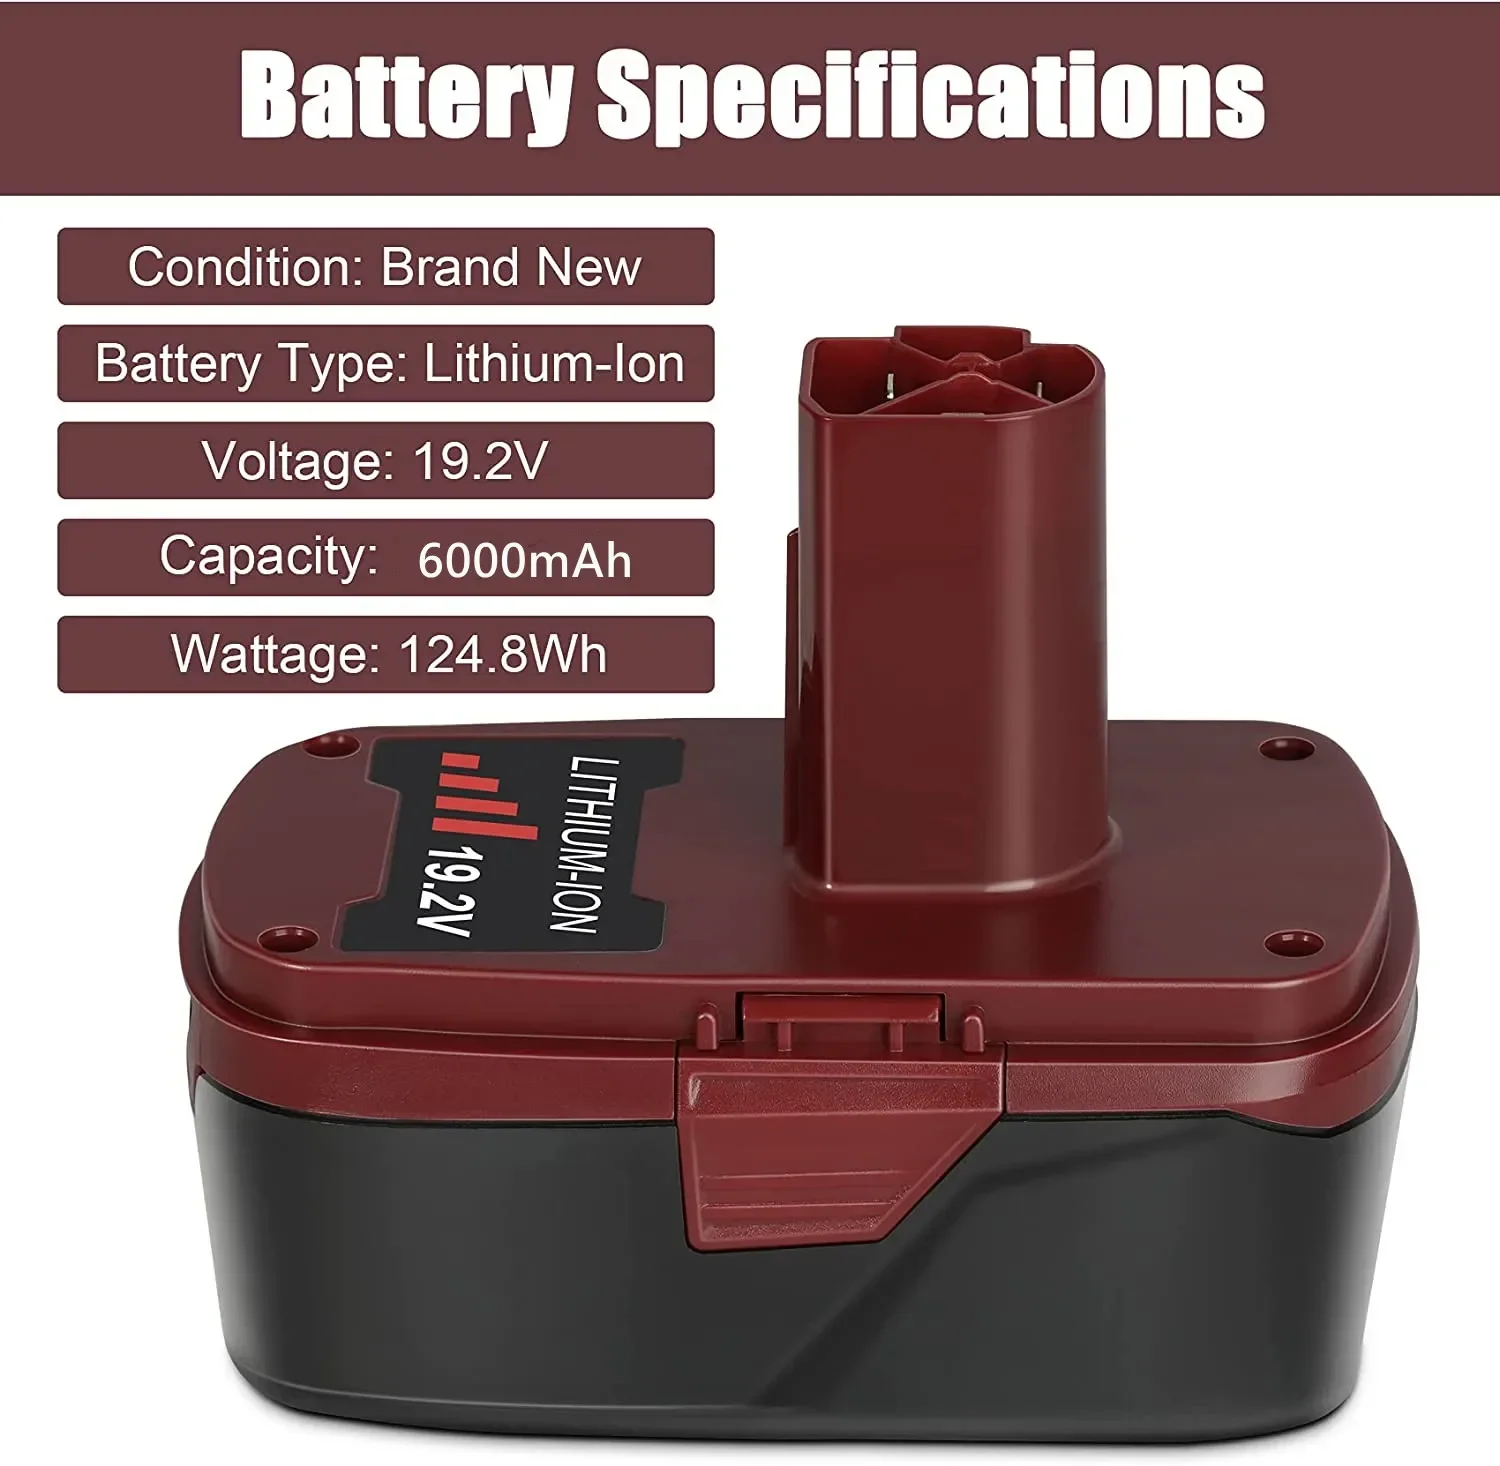 

2 Pack 6.0Ah 19.2V Lithium Ion Battery Replacement For Craftsman 19.2 Volt Battery XCP DieHard PP2011 PP2030 130156001130279005